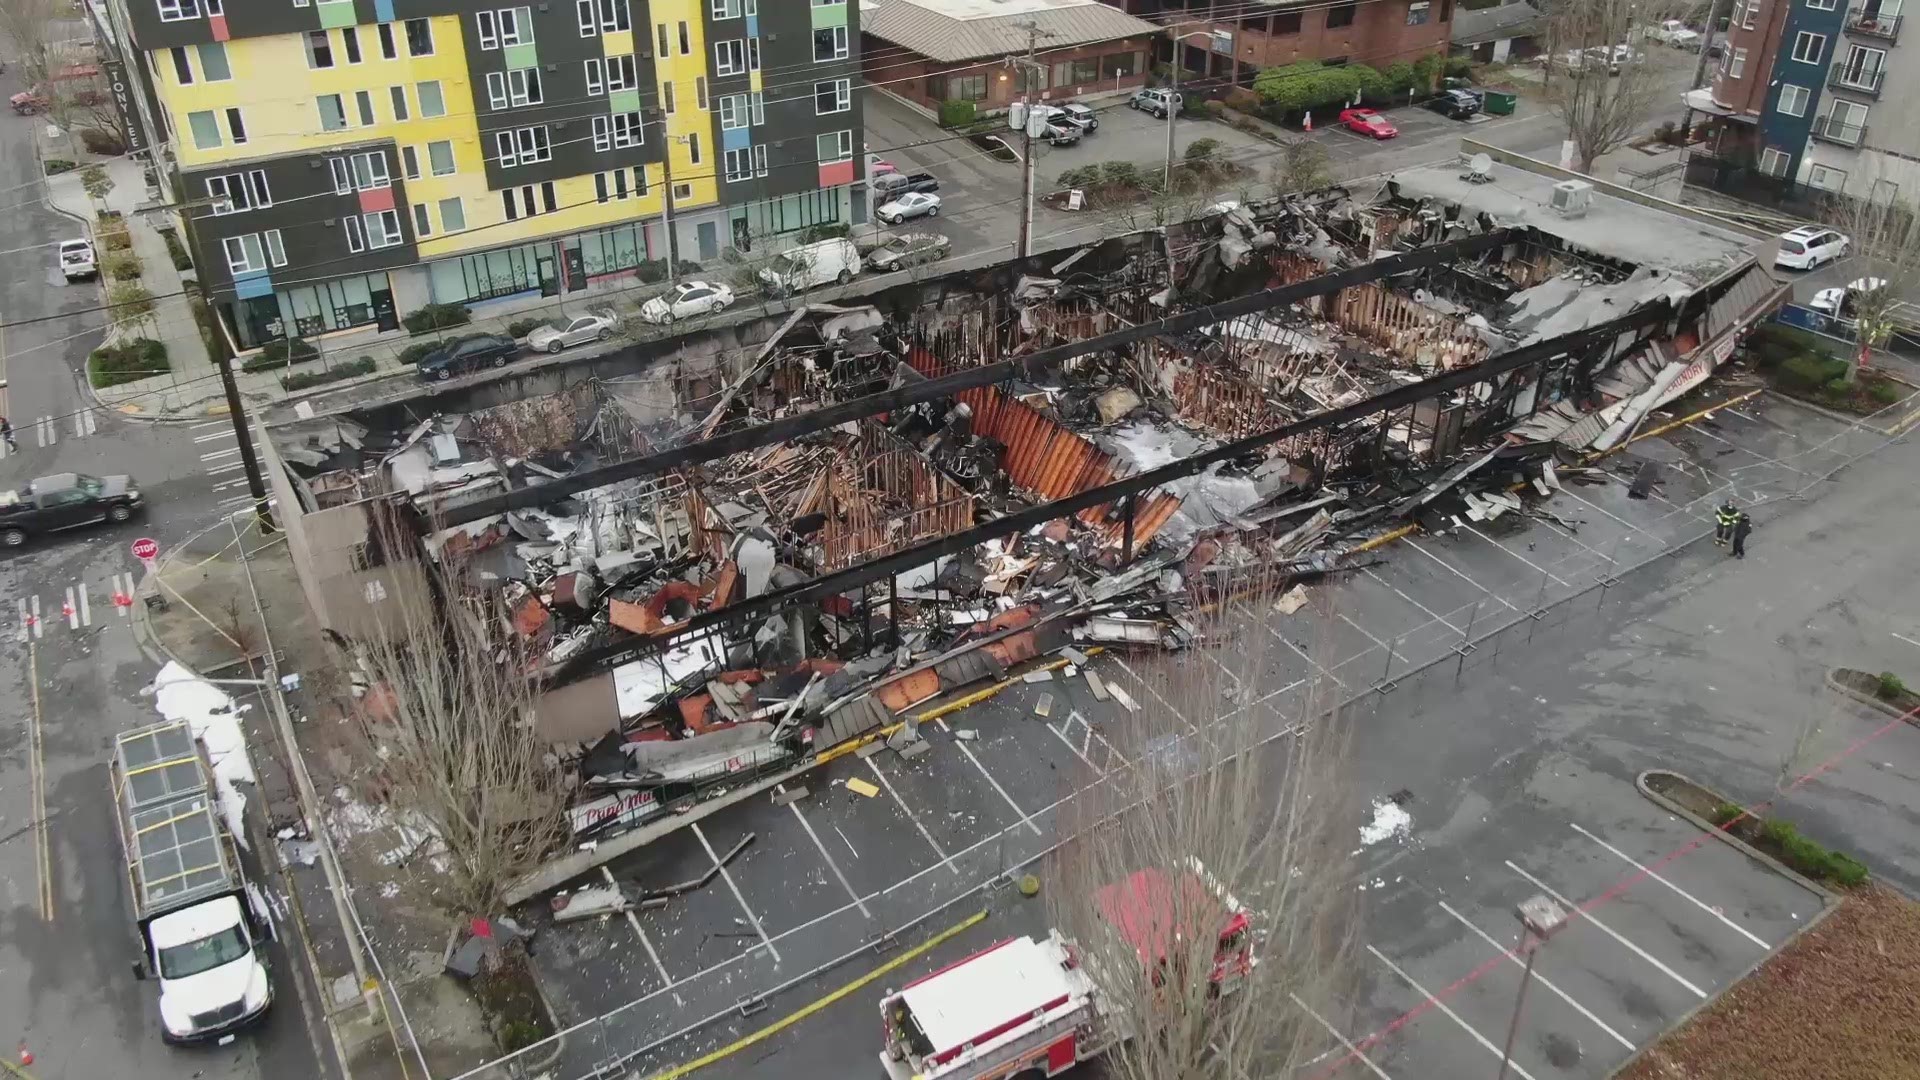 Several businesses were destroyed in a fire in Seattle's Lake City neighborhood on Dec. 28, 2020.